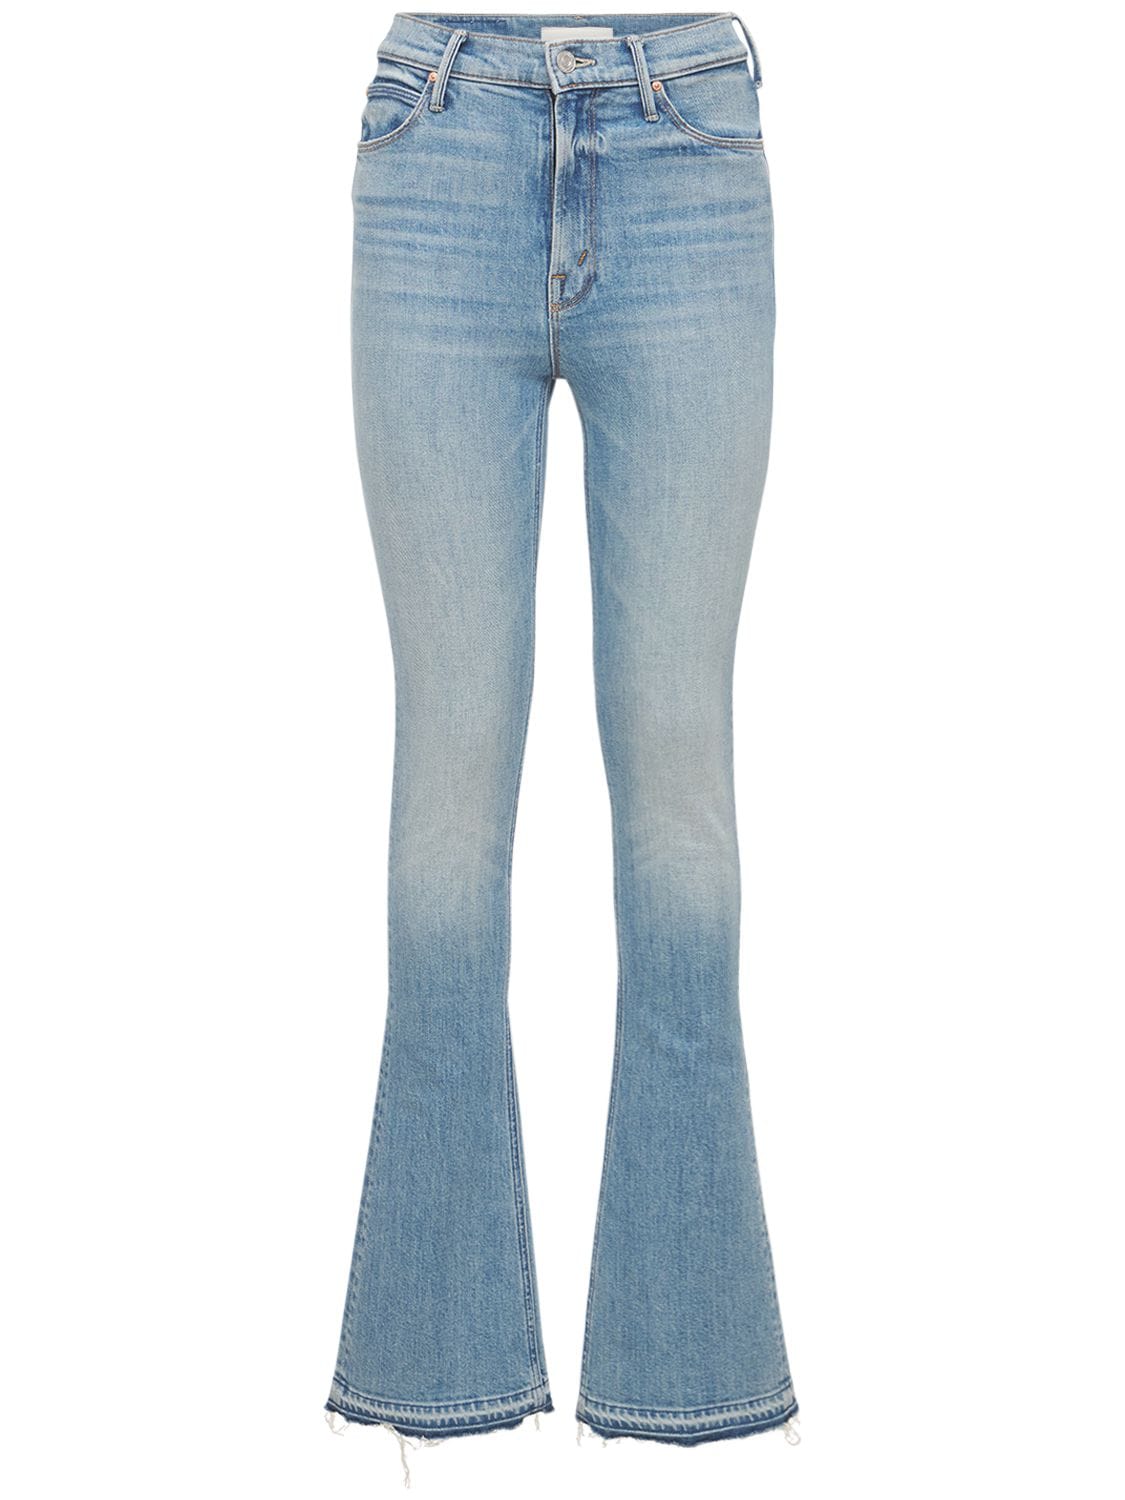 MOTHER High Waisted Runaway Jeans